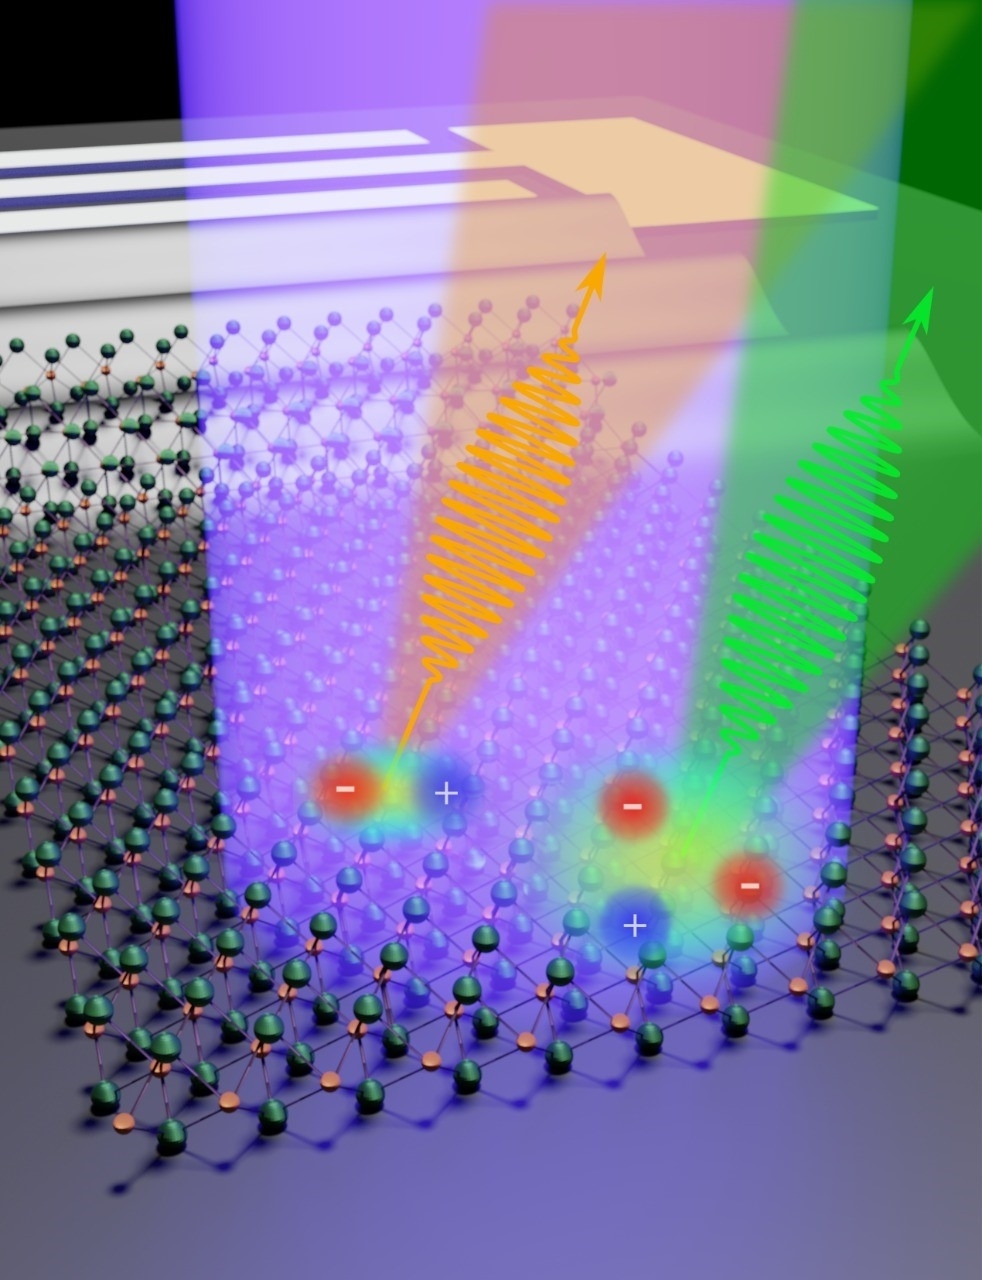 Researchers succeed in manipulating excitons using sound waves